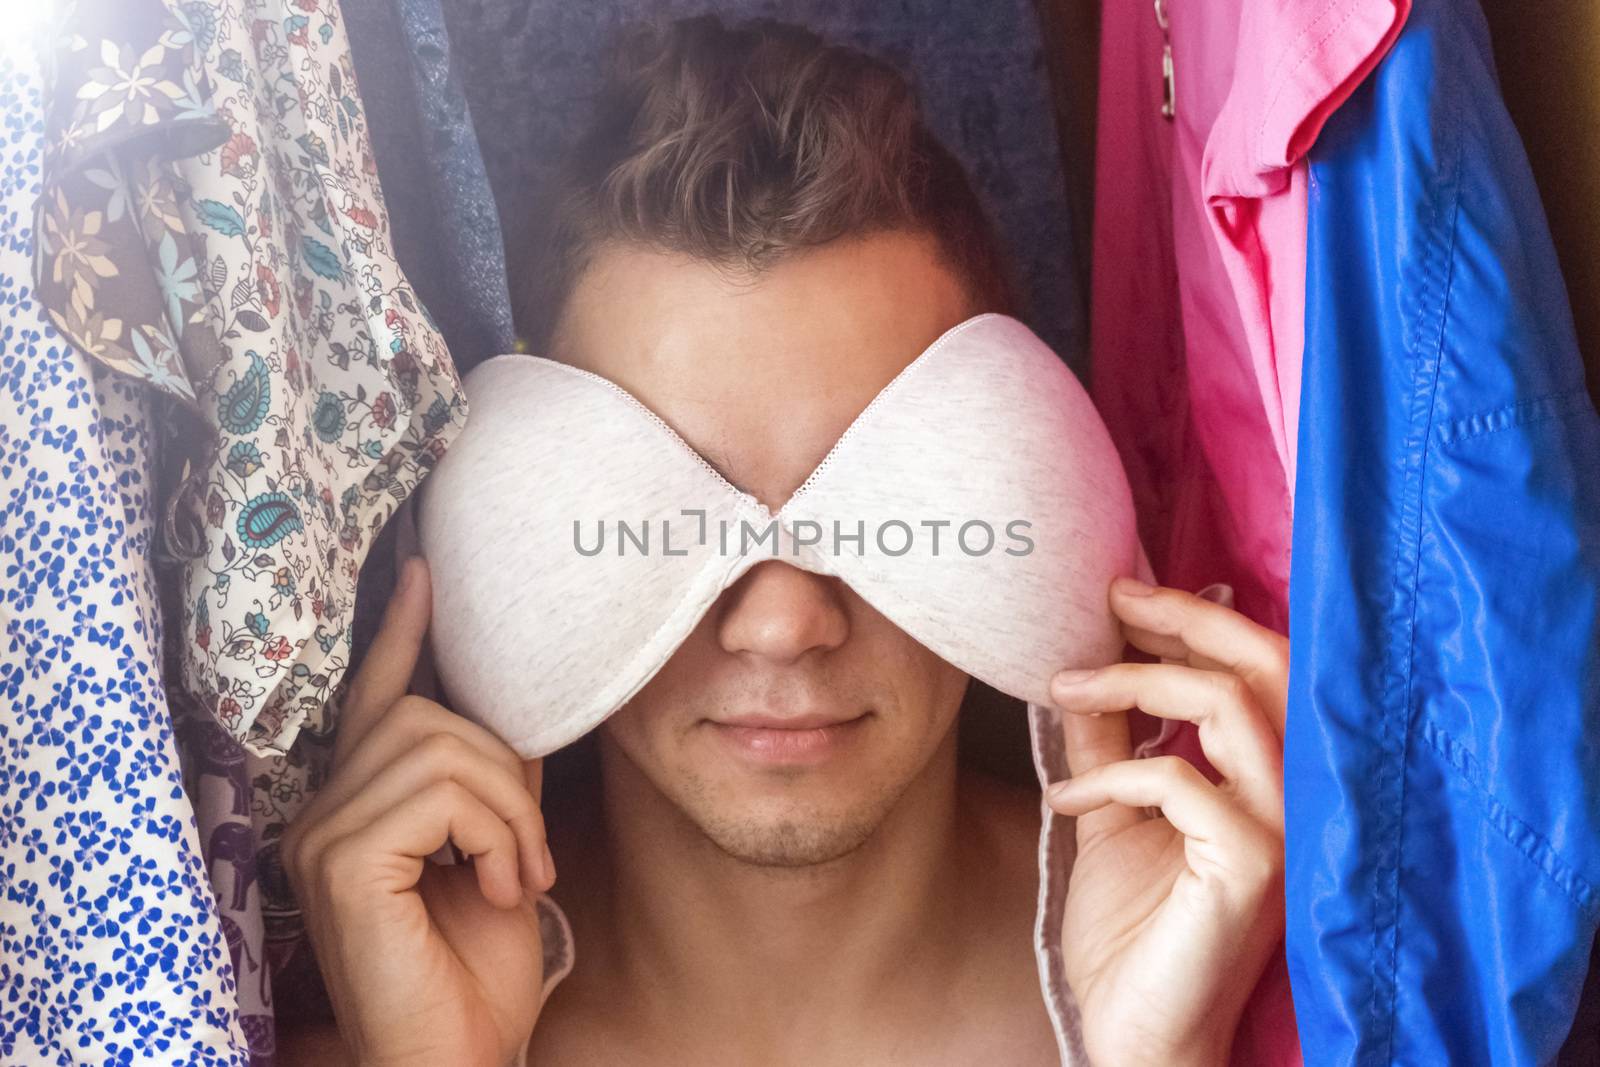 A young man hiding in the closet among women's clothing. Lover in the closet.